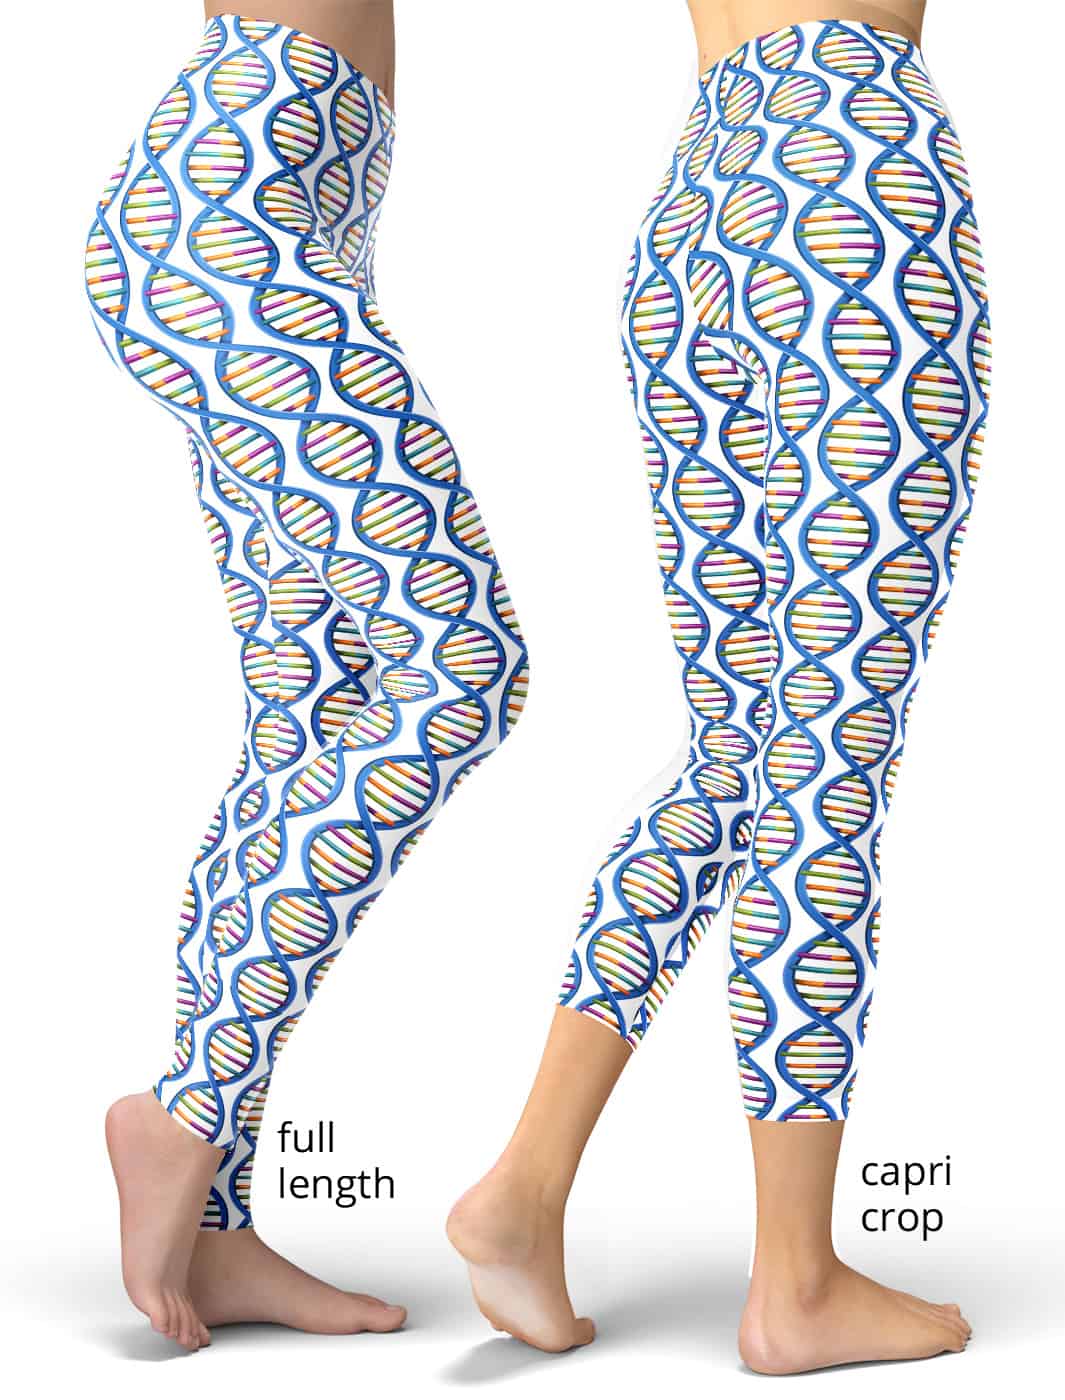 DNA Strand Leggings, Yoga Pants, Workout Pants, Deoxyribonucleic Acid,  Science Gifts, Biology Gifts, Nerdy Gifts, Leggings for Women 